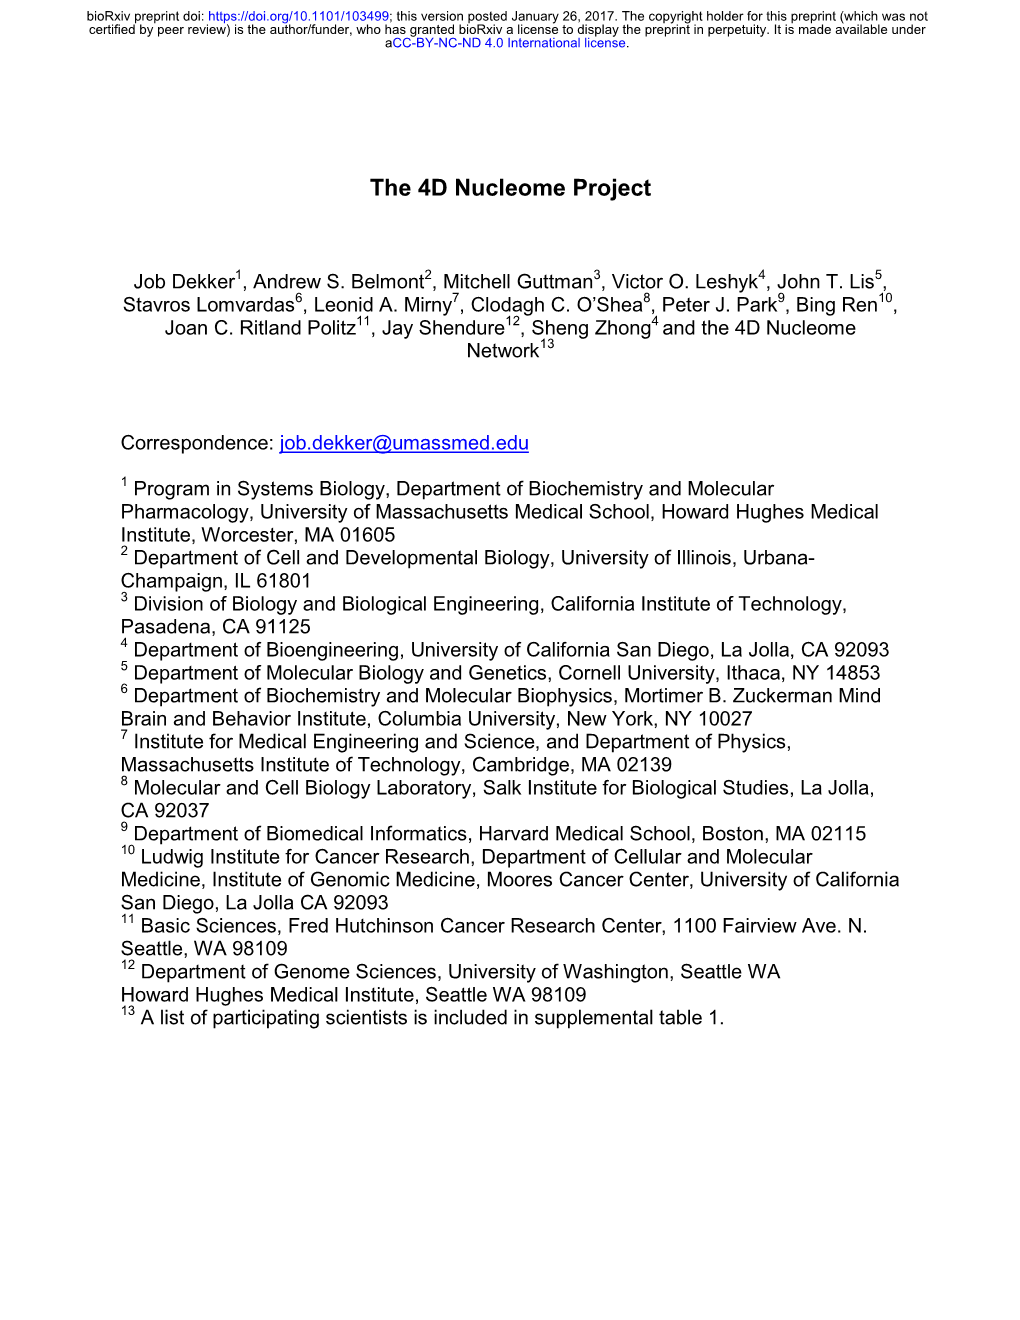 The 4D Nucleome Project